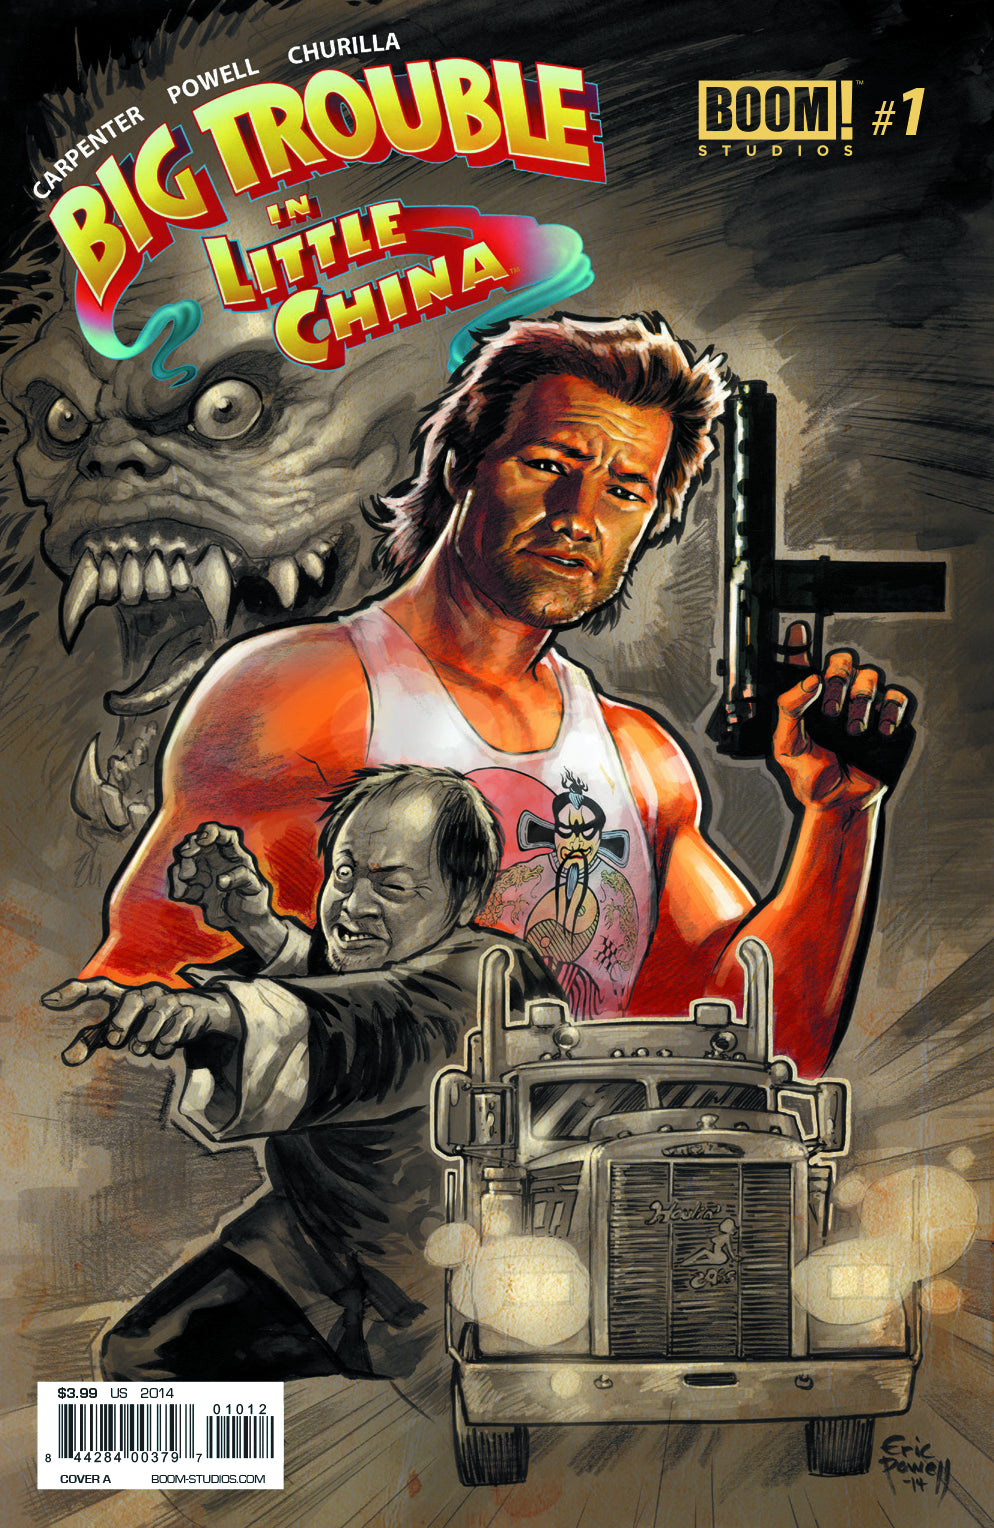 Big Trouble in Little China #1 - PACK OF ALL 14 Covers!